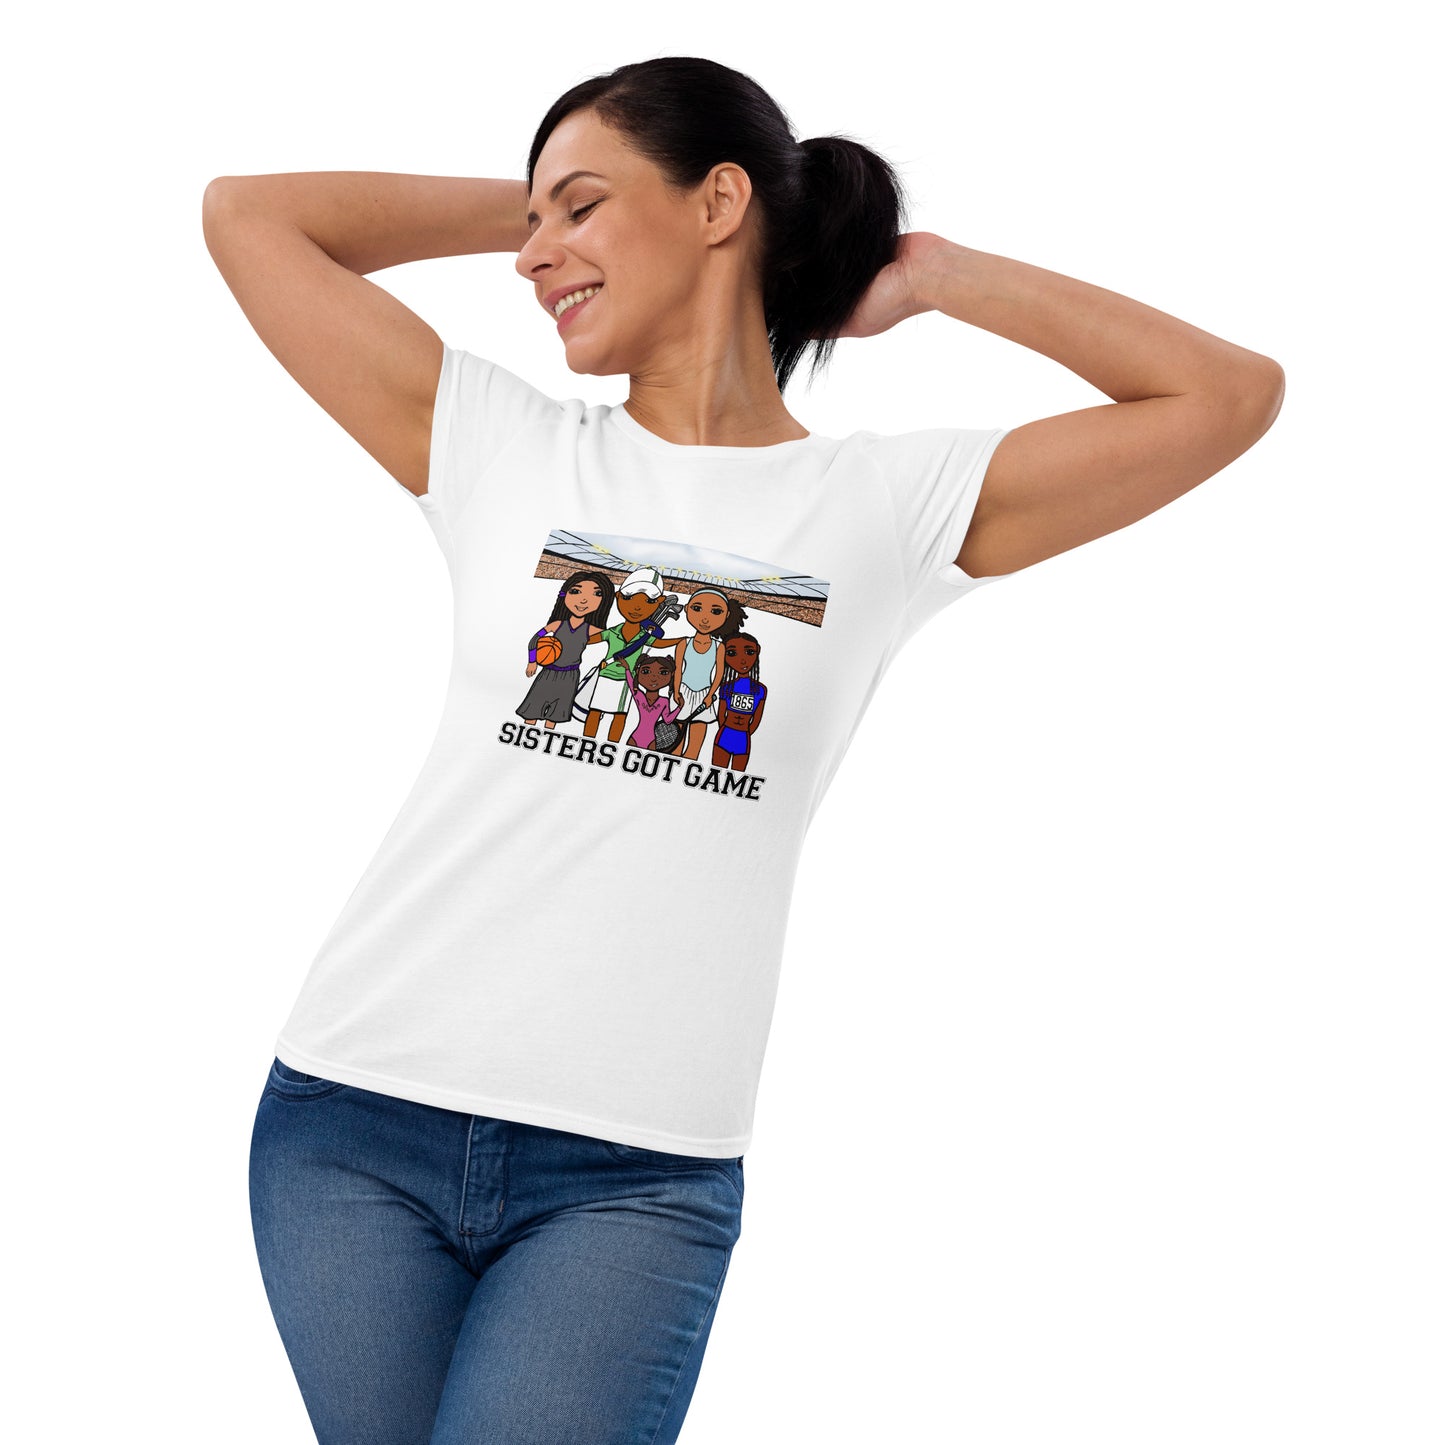 Sisters Got Game, Adult T-Shirt | Applauding the Dynamic Women of Sports